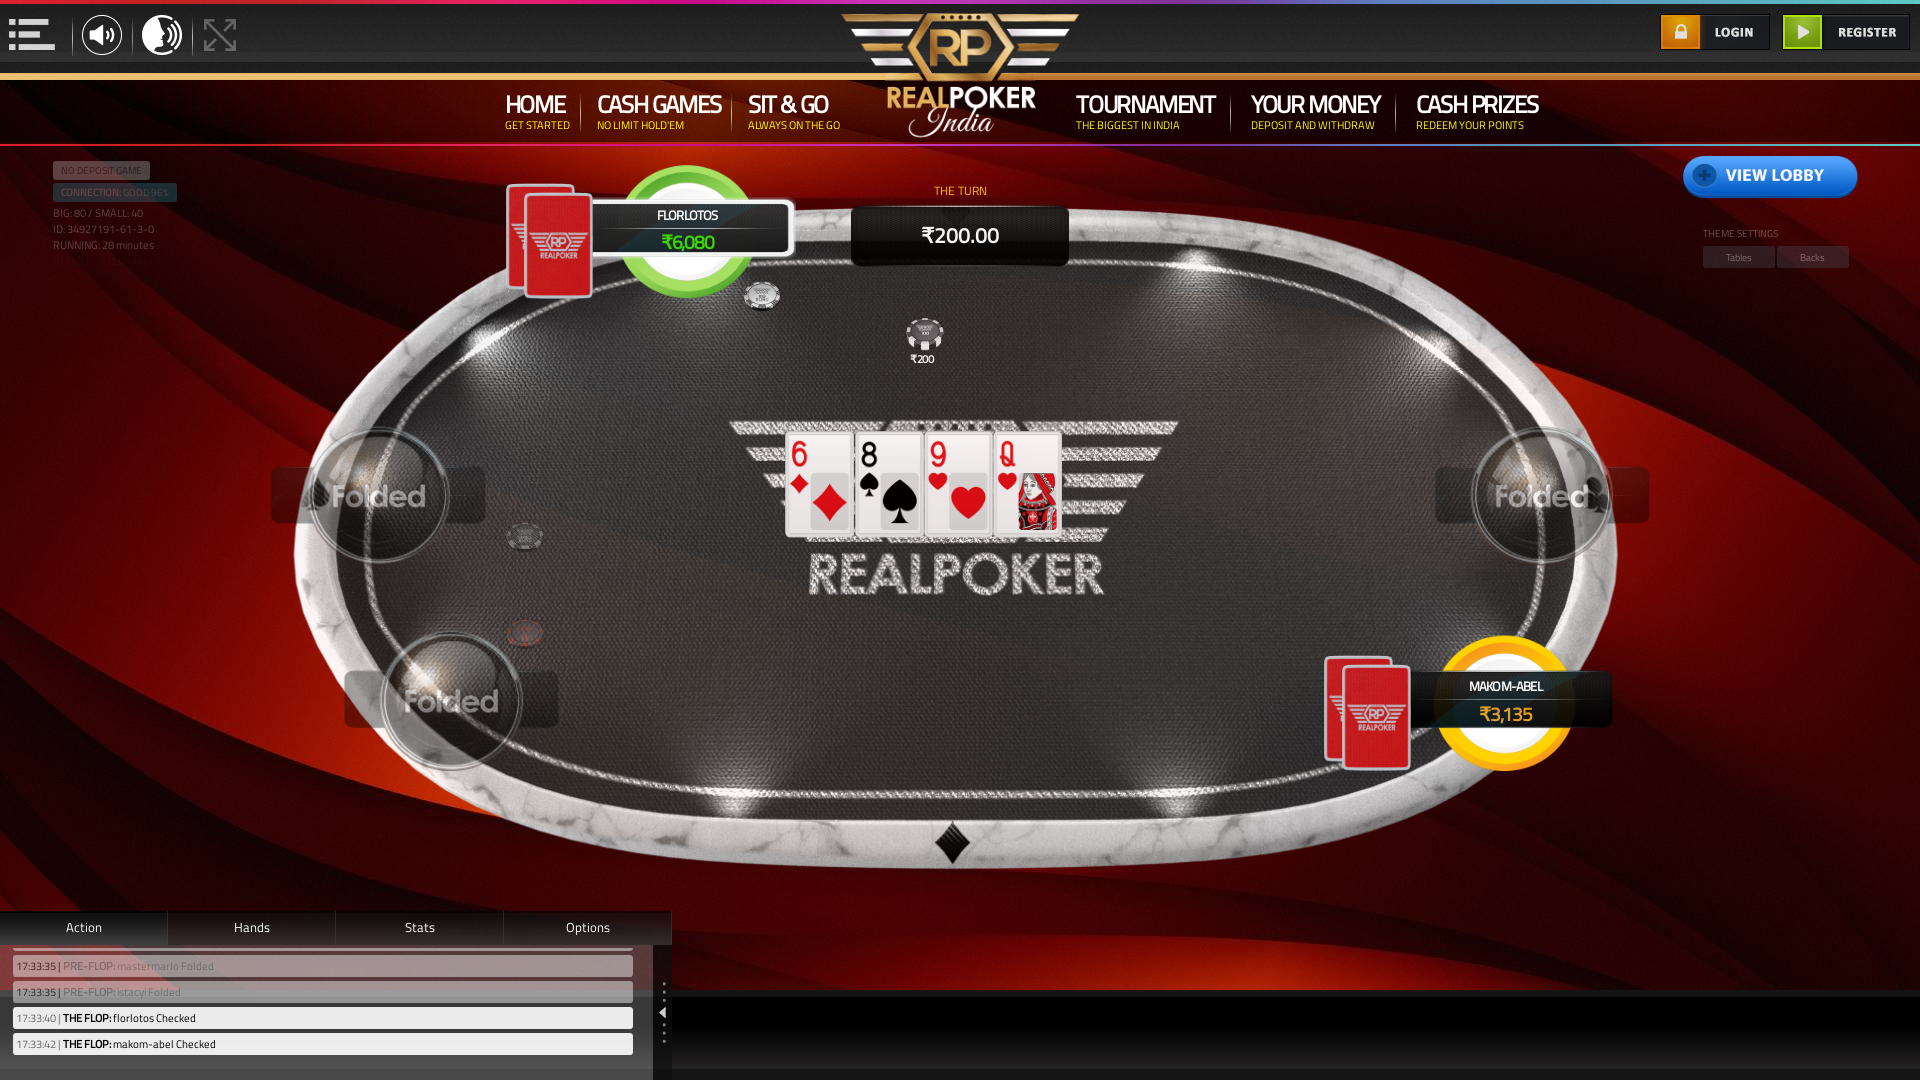 Lower Parel, Mumbai online poker game on a 10 player table in the 28th minute